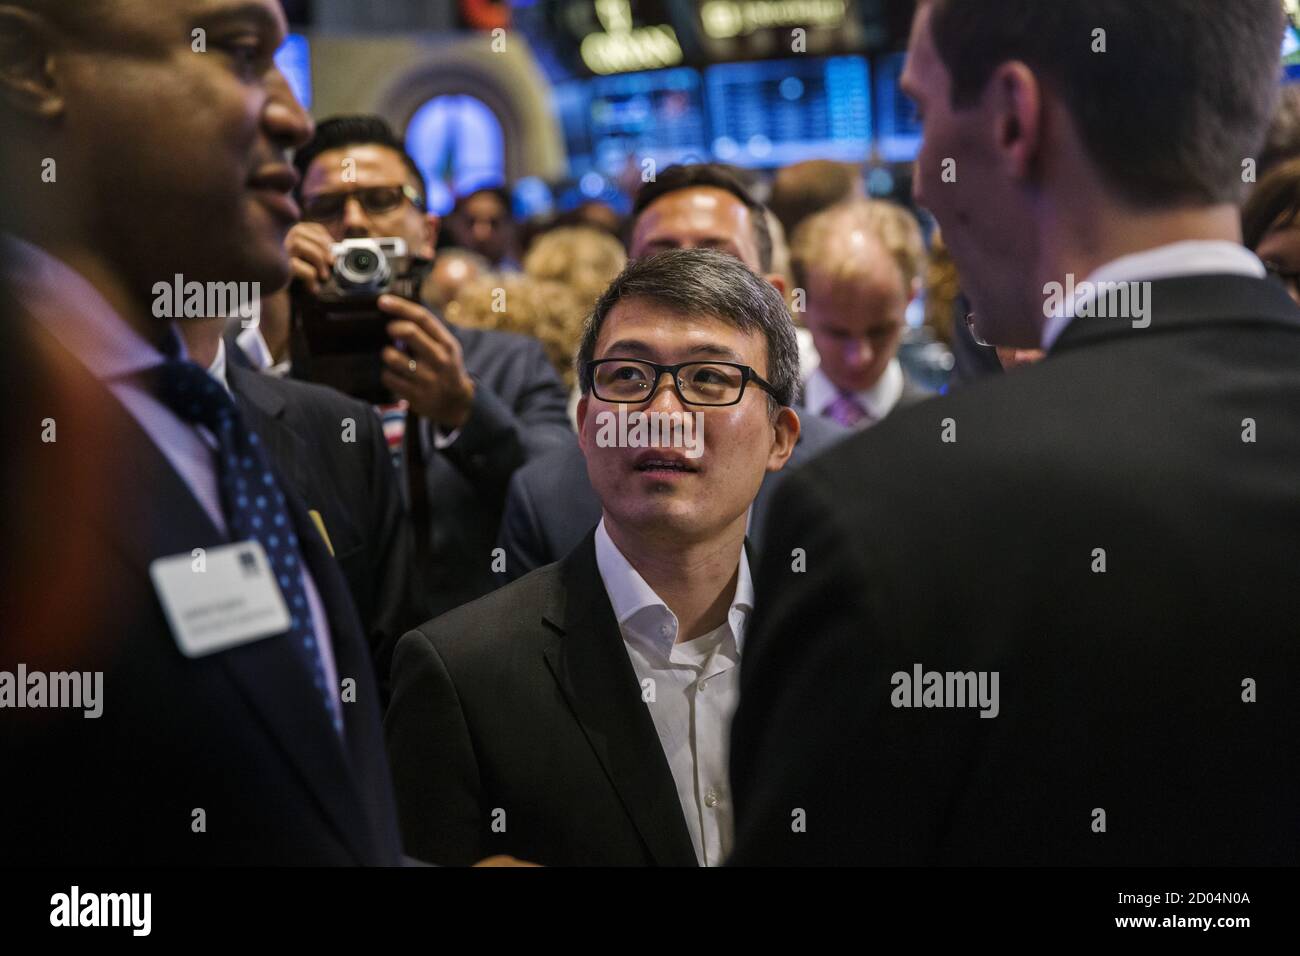 James Park, Fitbit CEO, walks across the floor as he arrives for the  company's IPO on the floor of the New York Stock Exchange, June 18, 2015.  Shares of Fitbit Inc, the